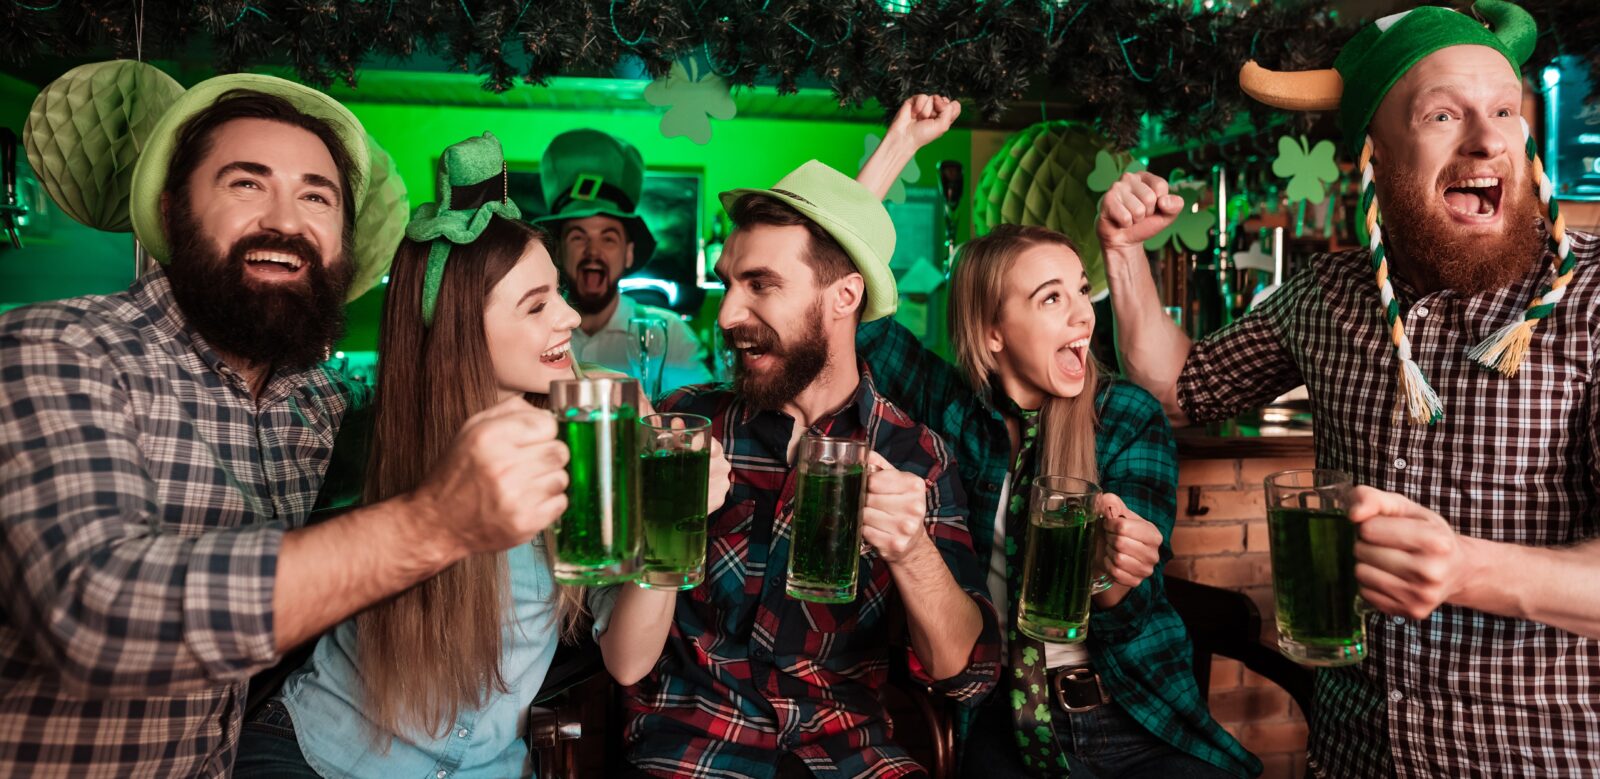 Do The Almost St. Patty’s Day Pub Crawl in Long Beach!